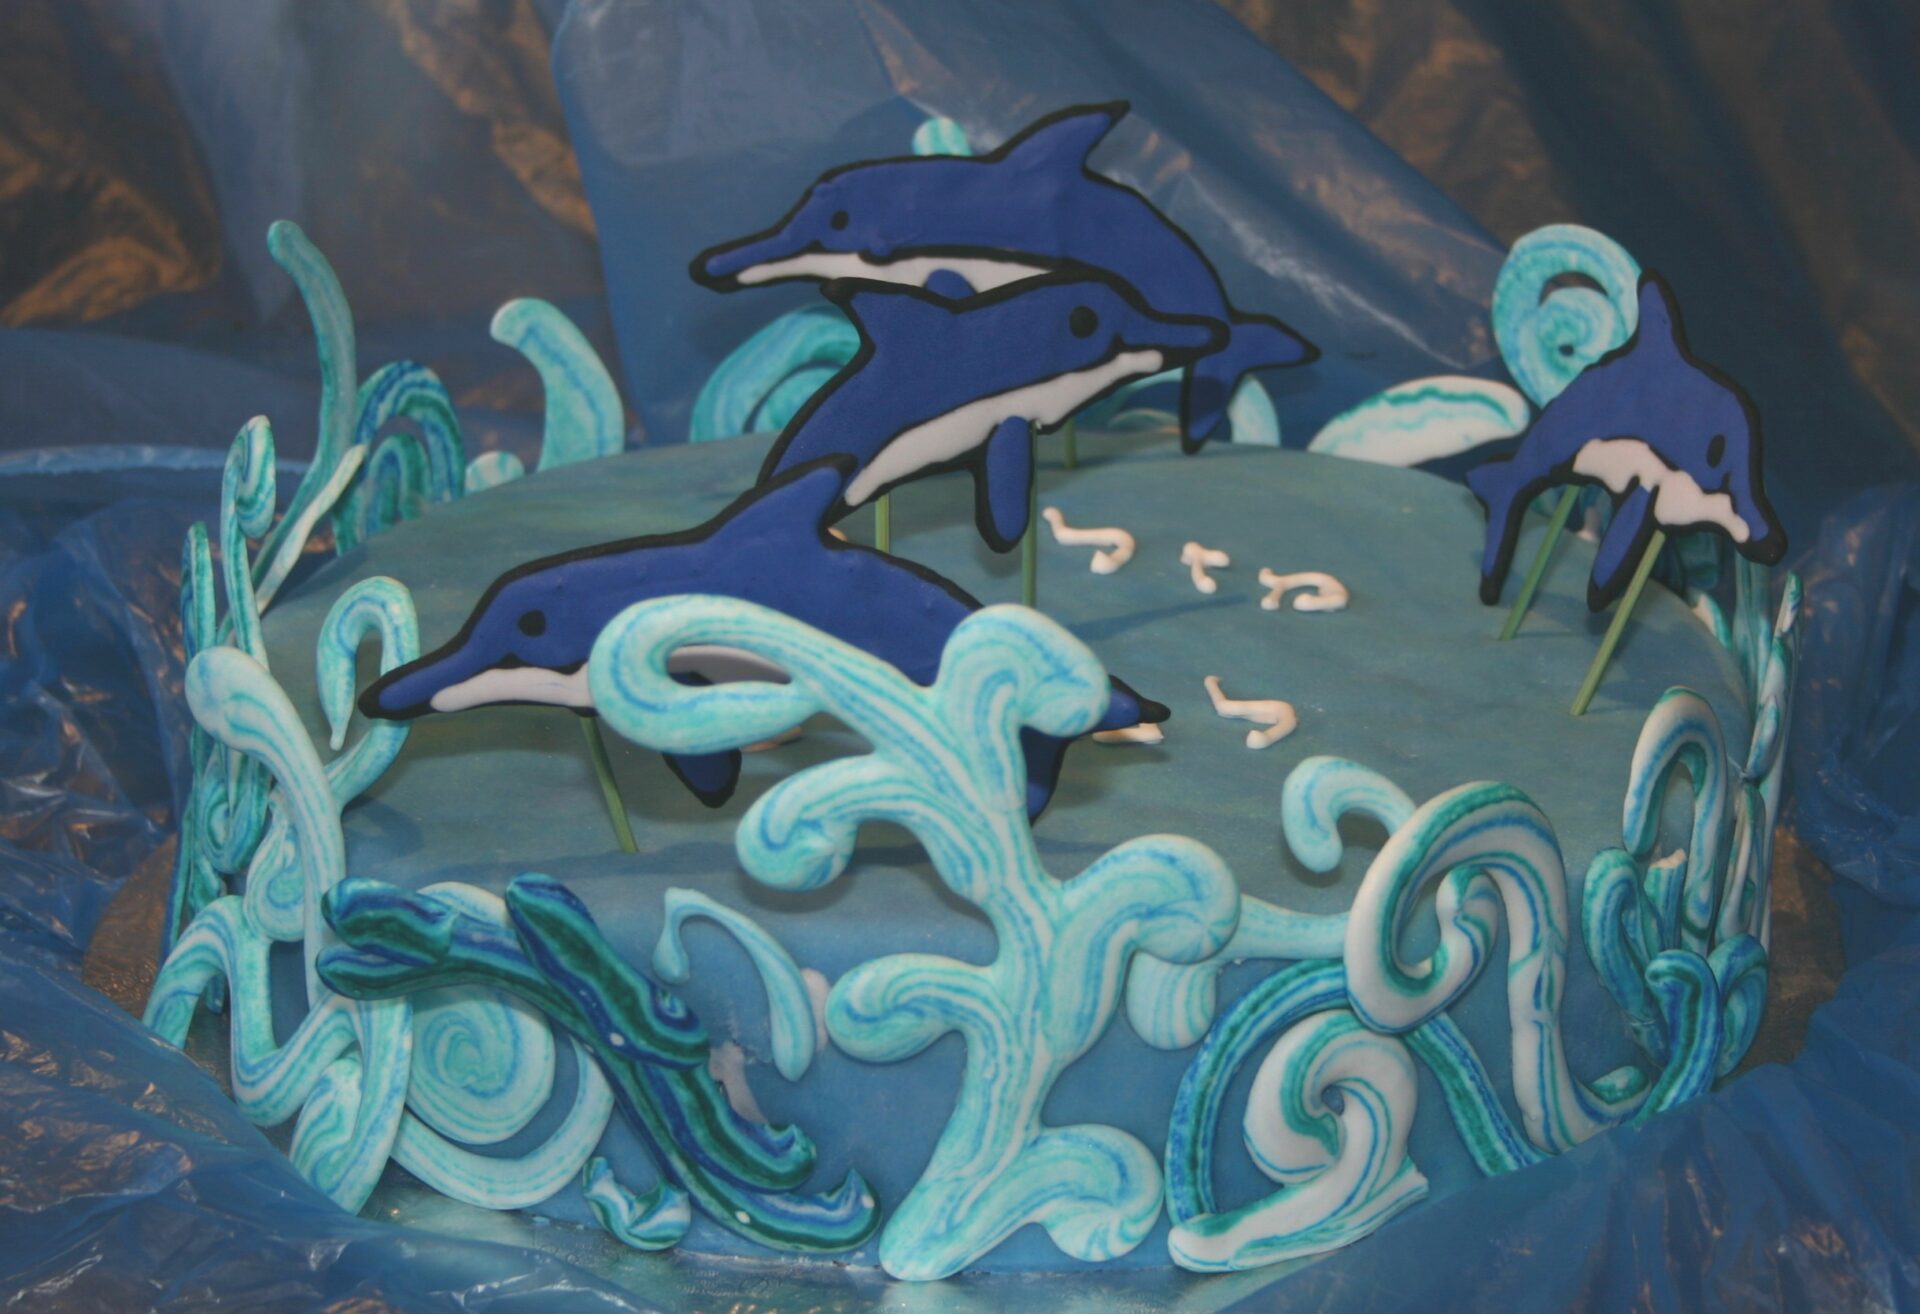 Dolphin Birthday Cake - Decorated Cake by Cakes By Rian - CakesDecor